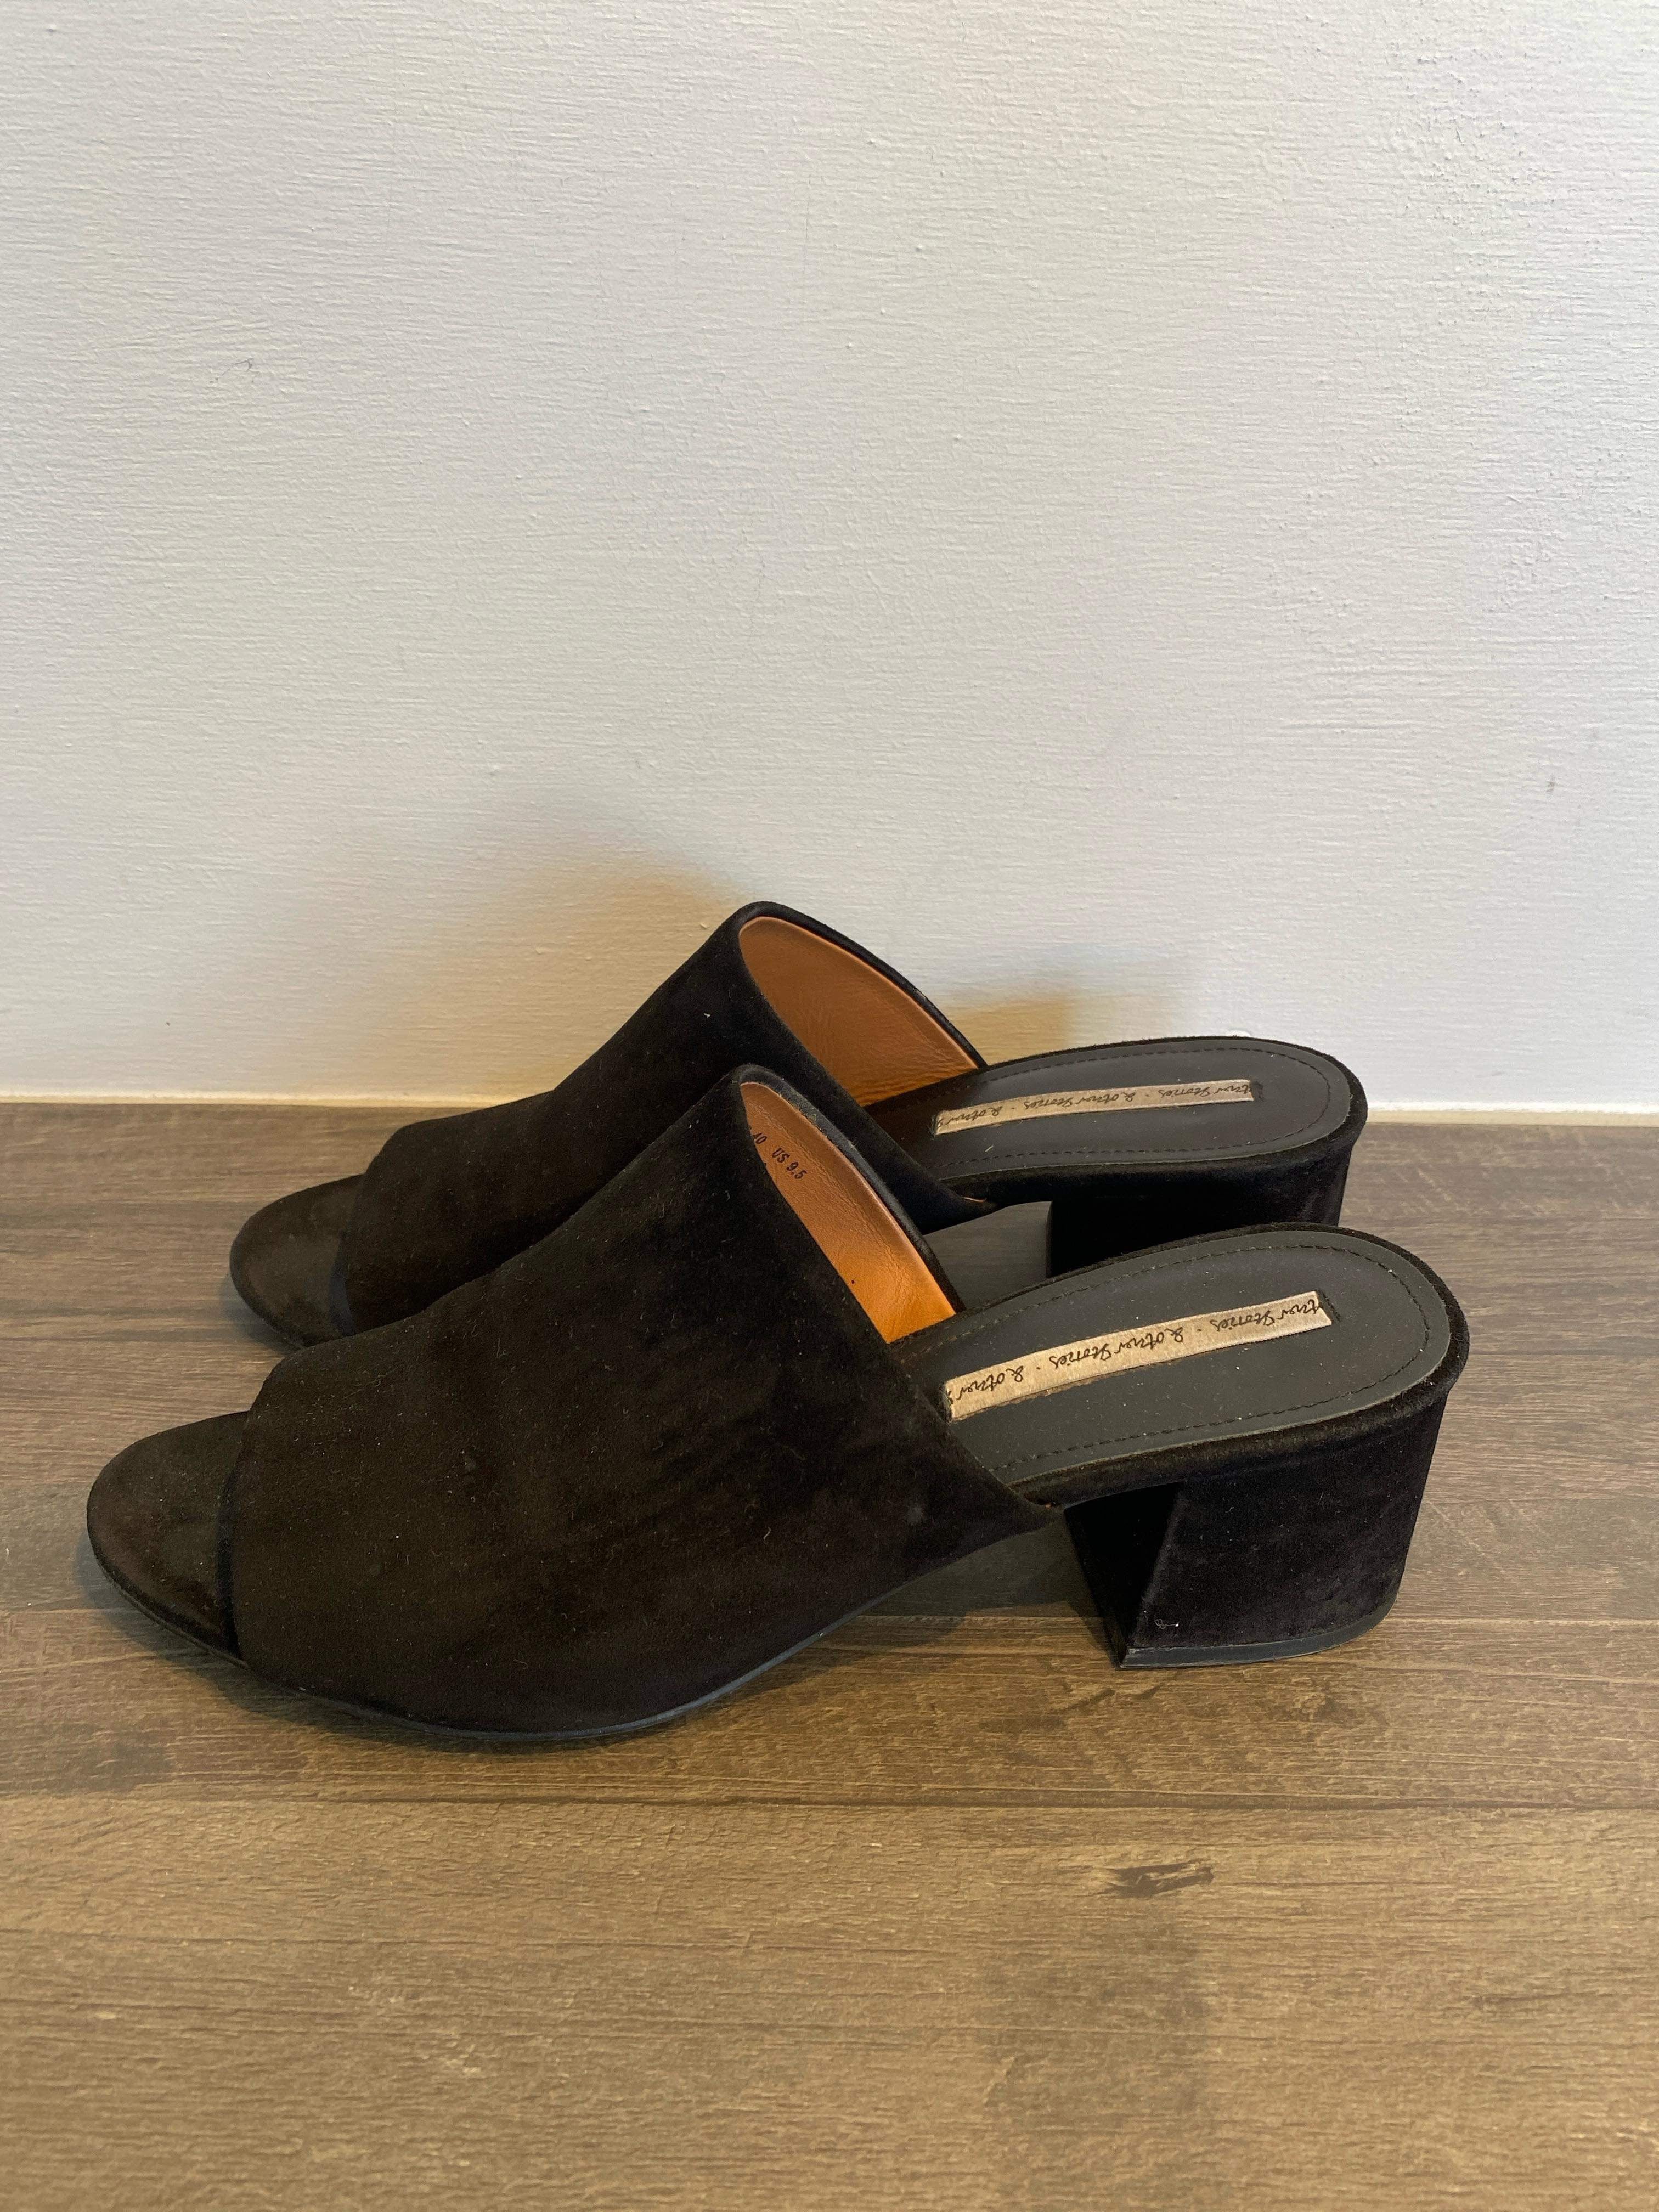 & Other Stories - Mules - Size: 40